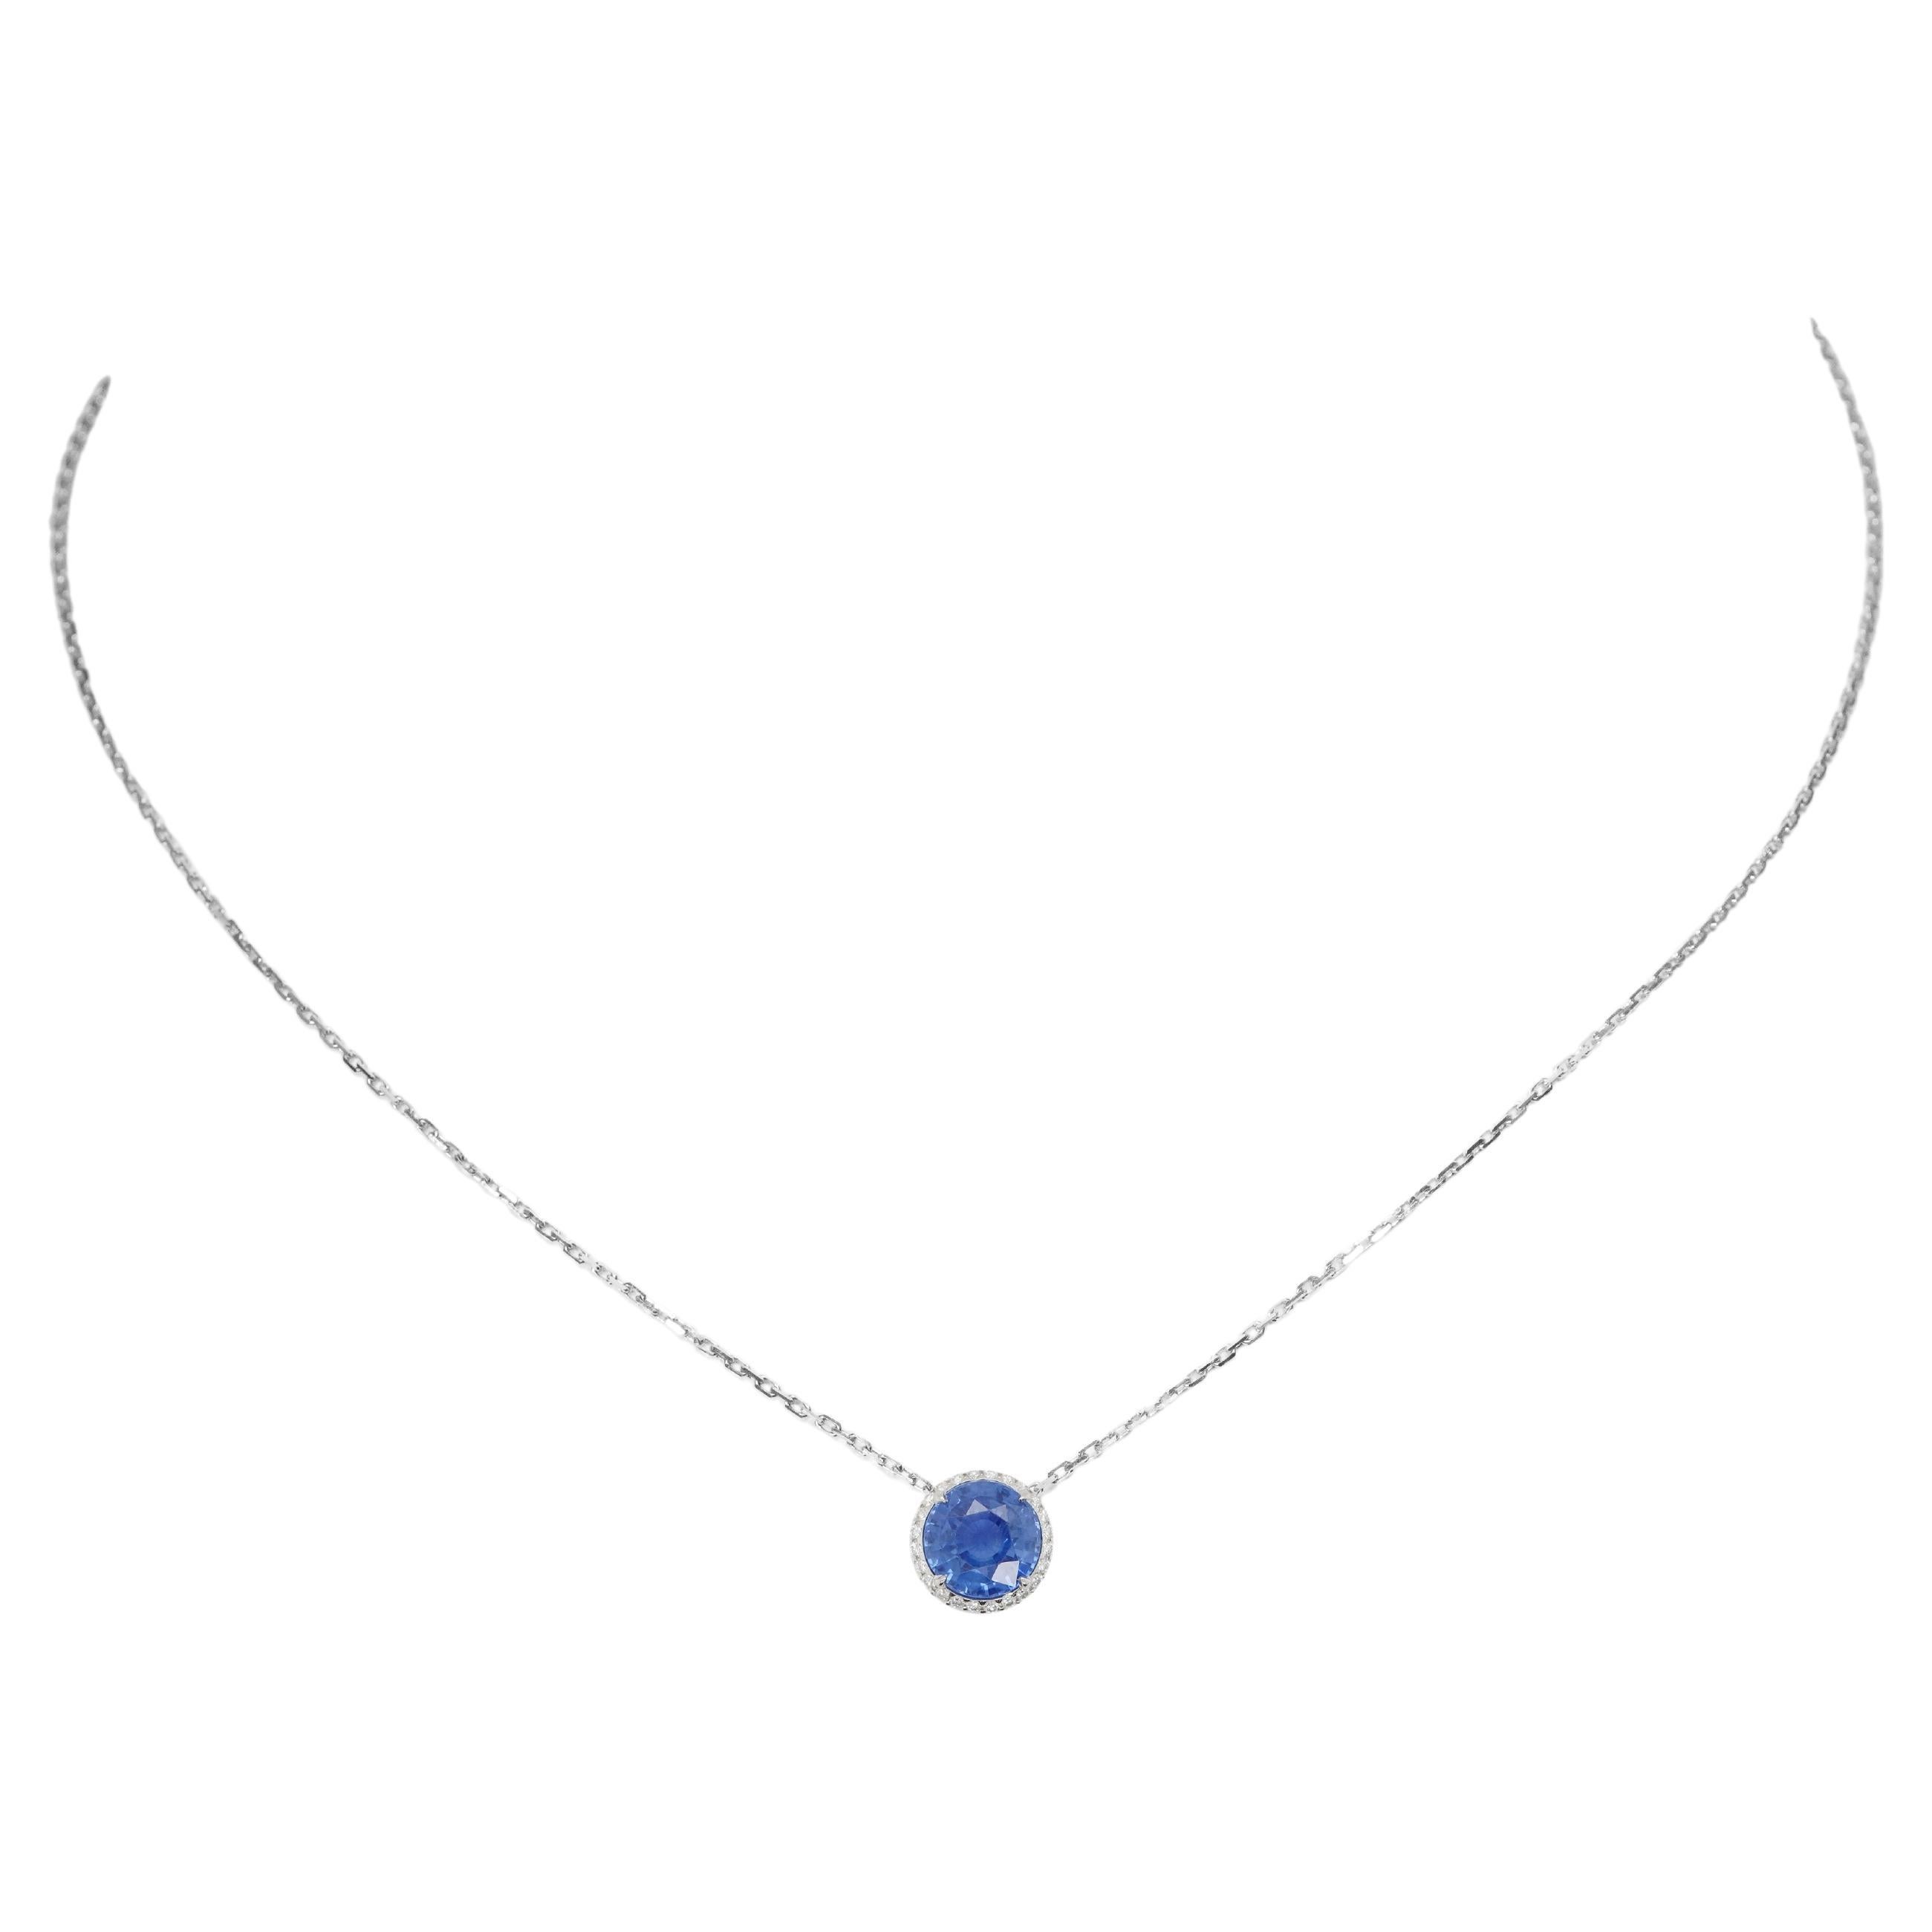 18K White Gold Necklace With Sapphire 3.04 ct. For Sale